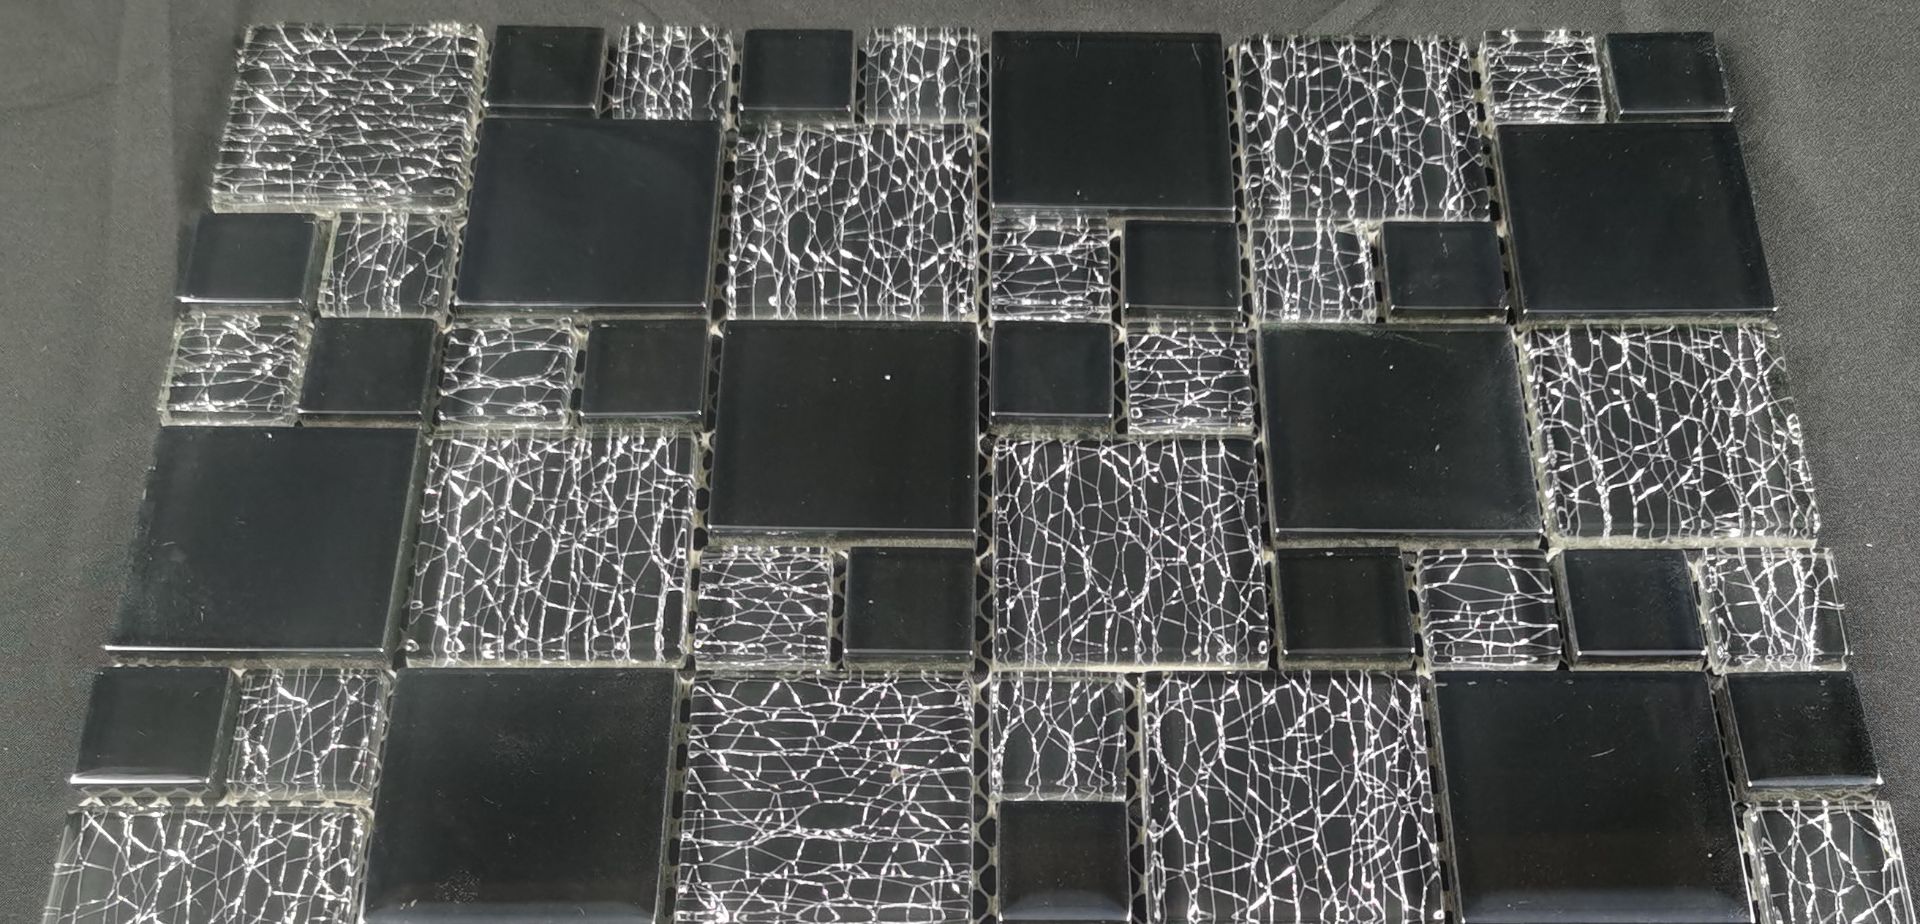 10 Square Metres - High Quality Glass/Stainless Steel Mosaic Tiles -110 sheets - Image 5 of 5